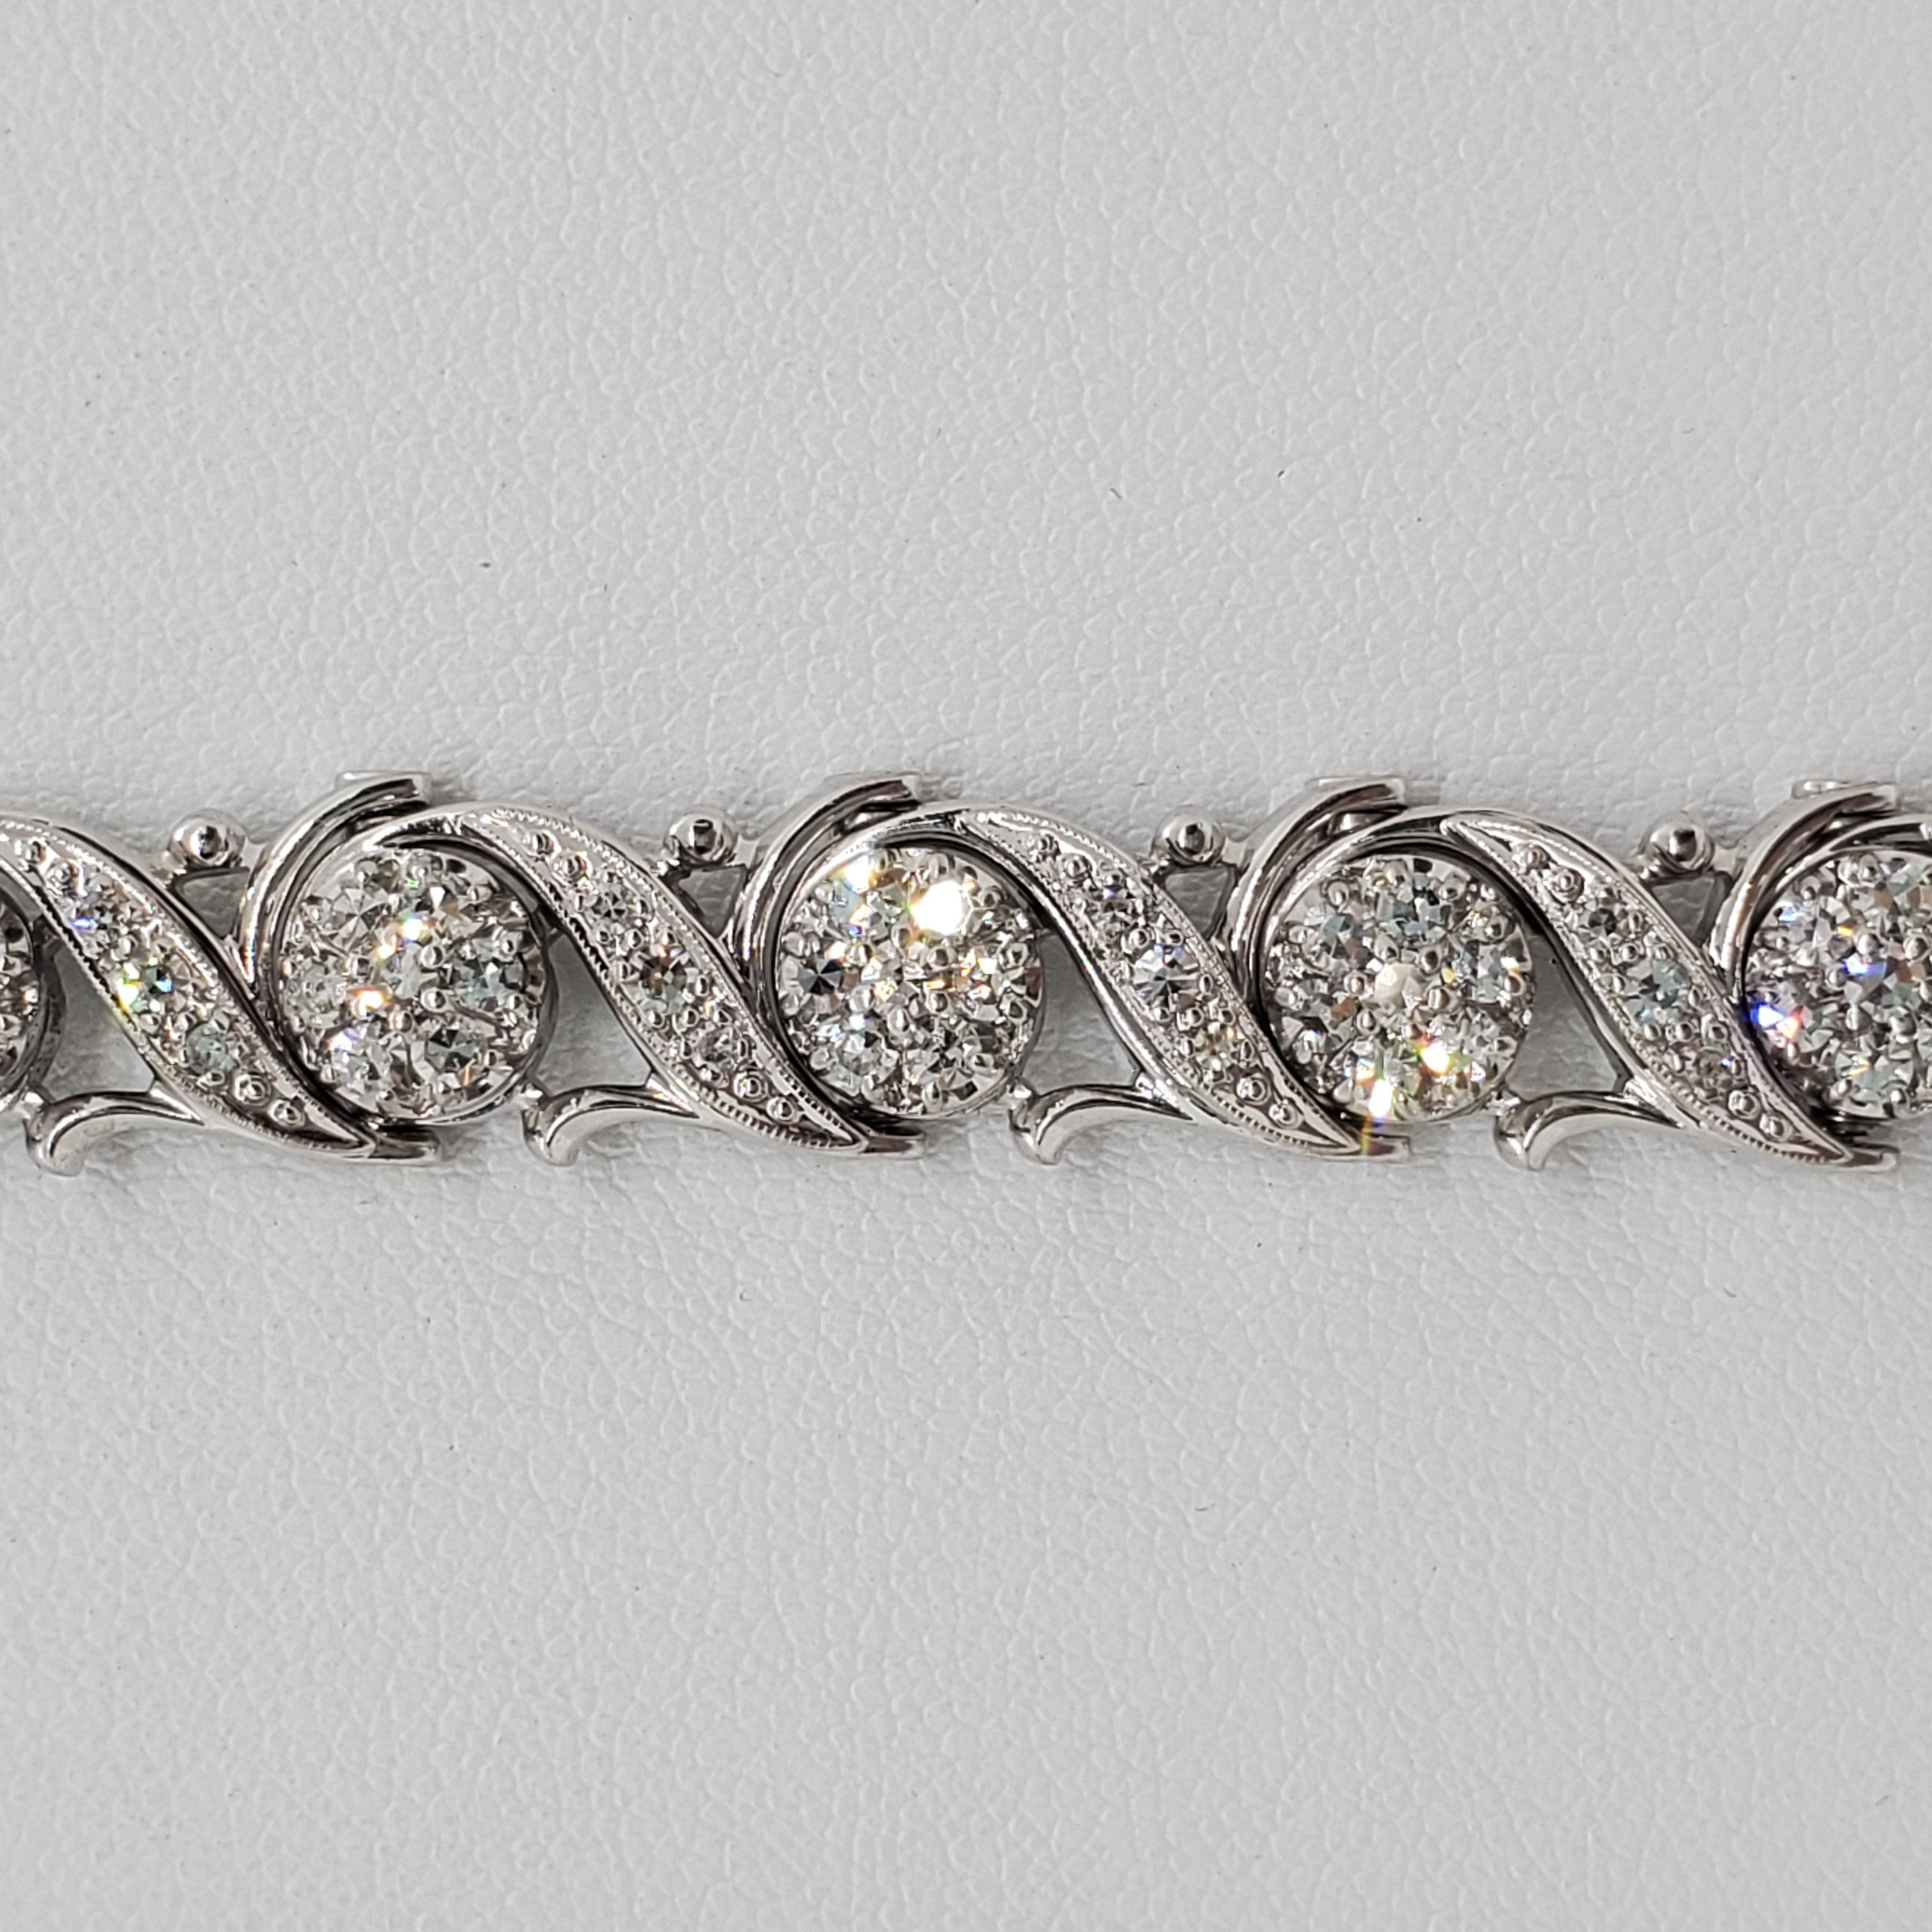 Amazing estate Jabel white diamond bracelet with 6.00 cts of good quality, white and bright diamonds.  Handcrafted carefully in 18k white gold. Length is 7